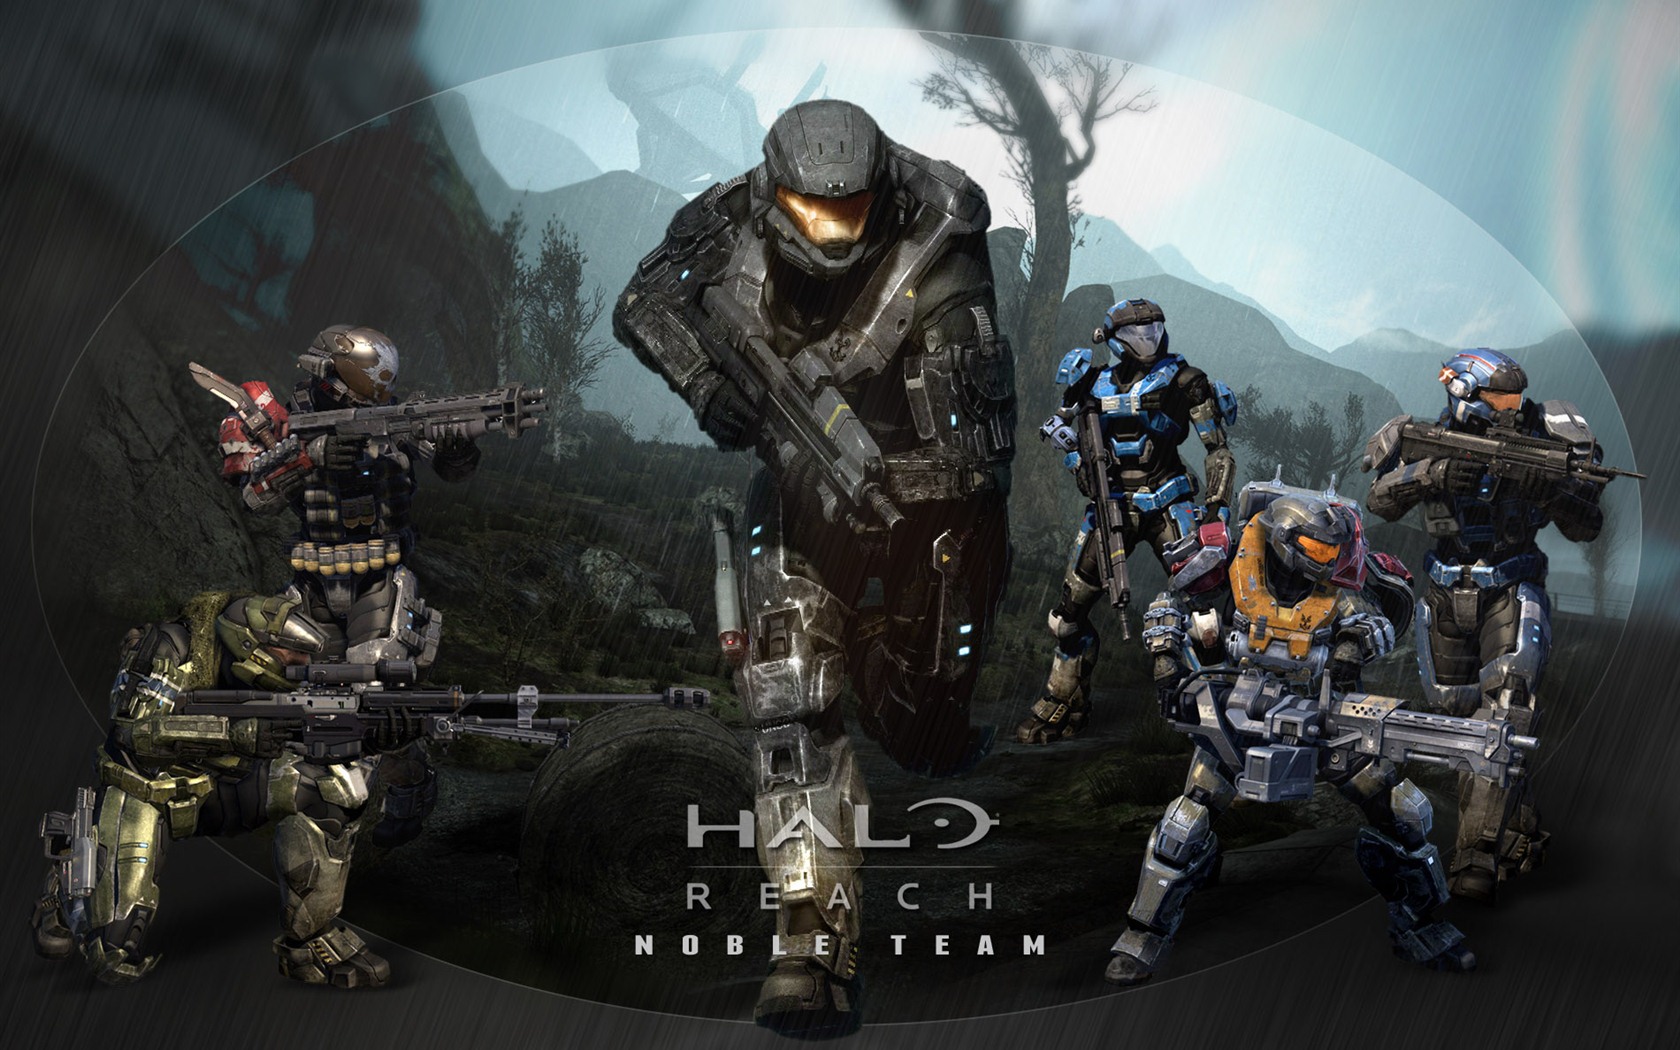 Halo game HD wallpapers #23 - 1680x1050